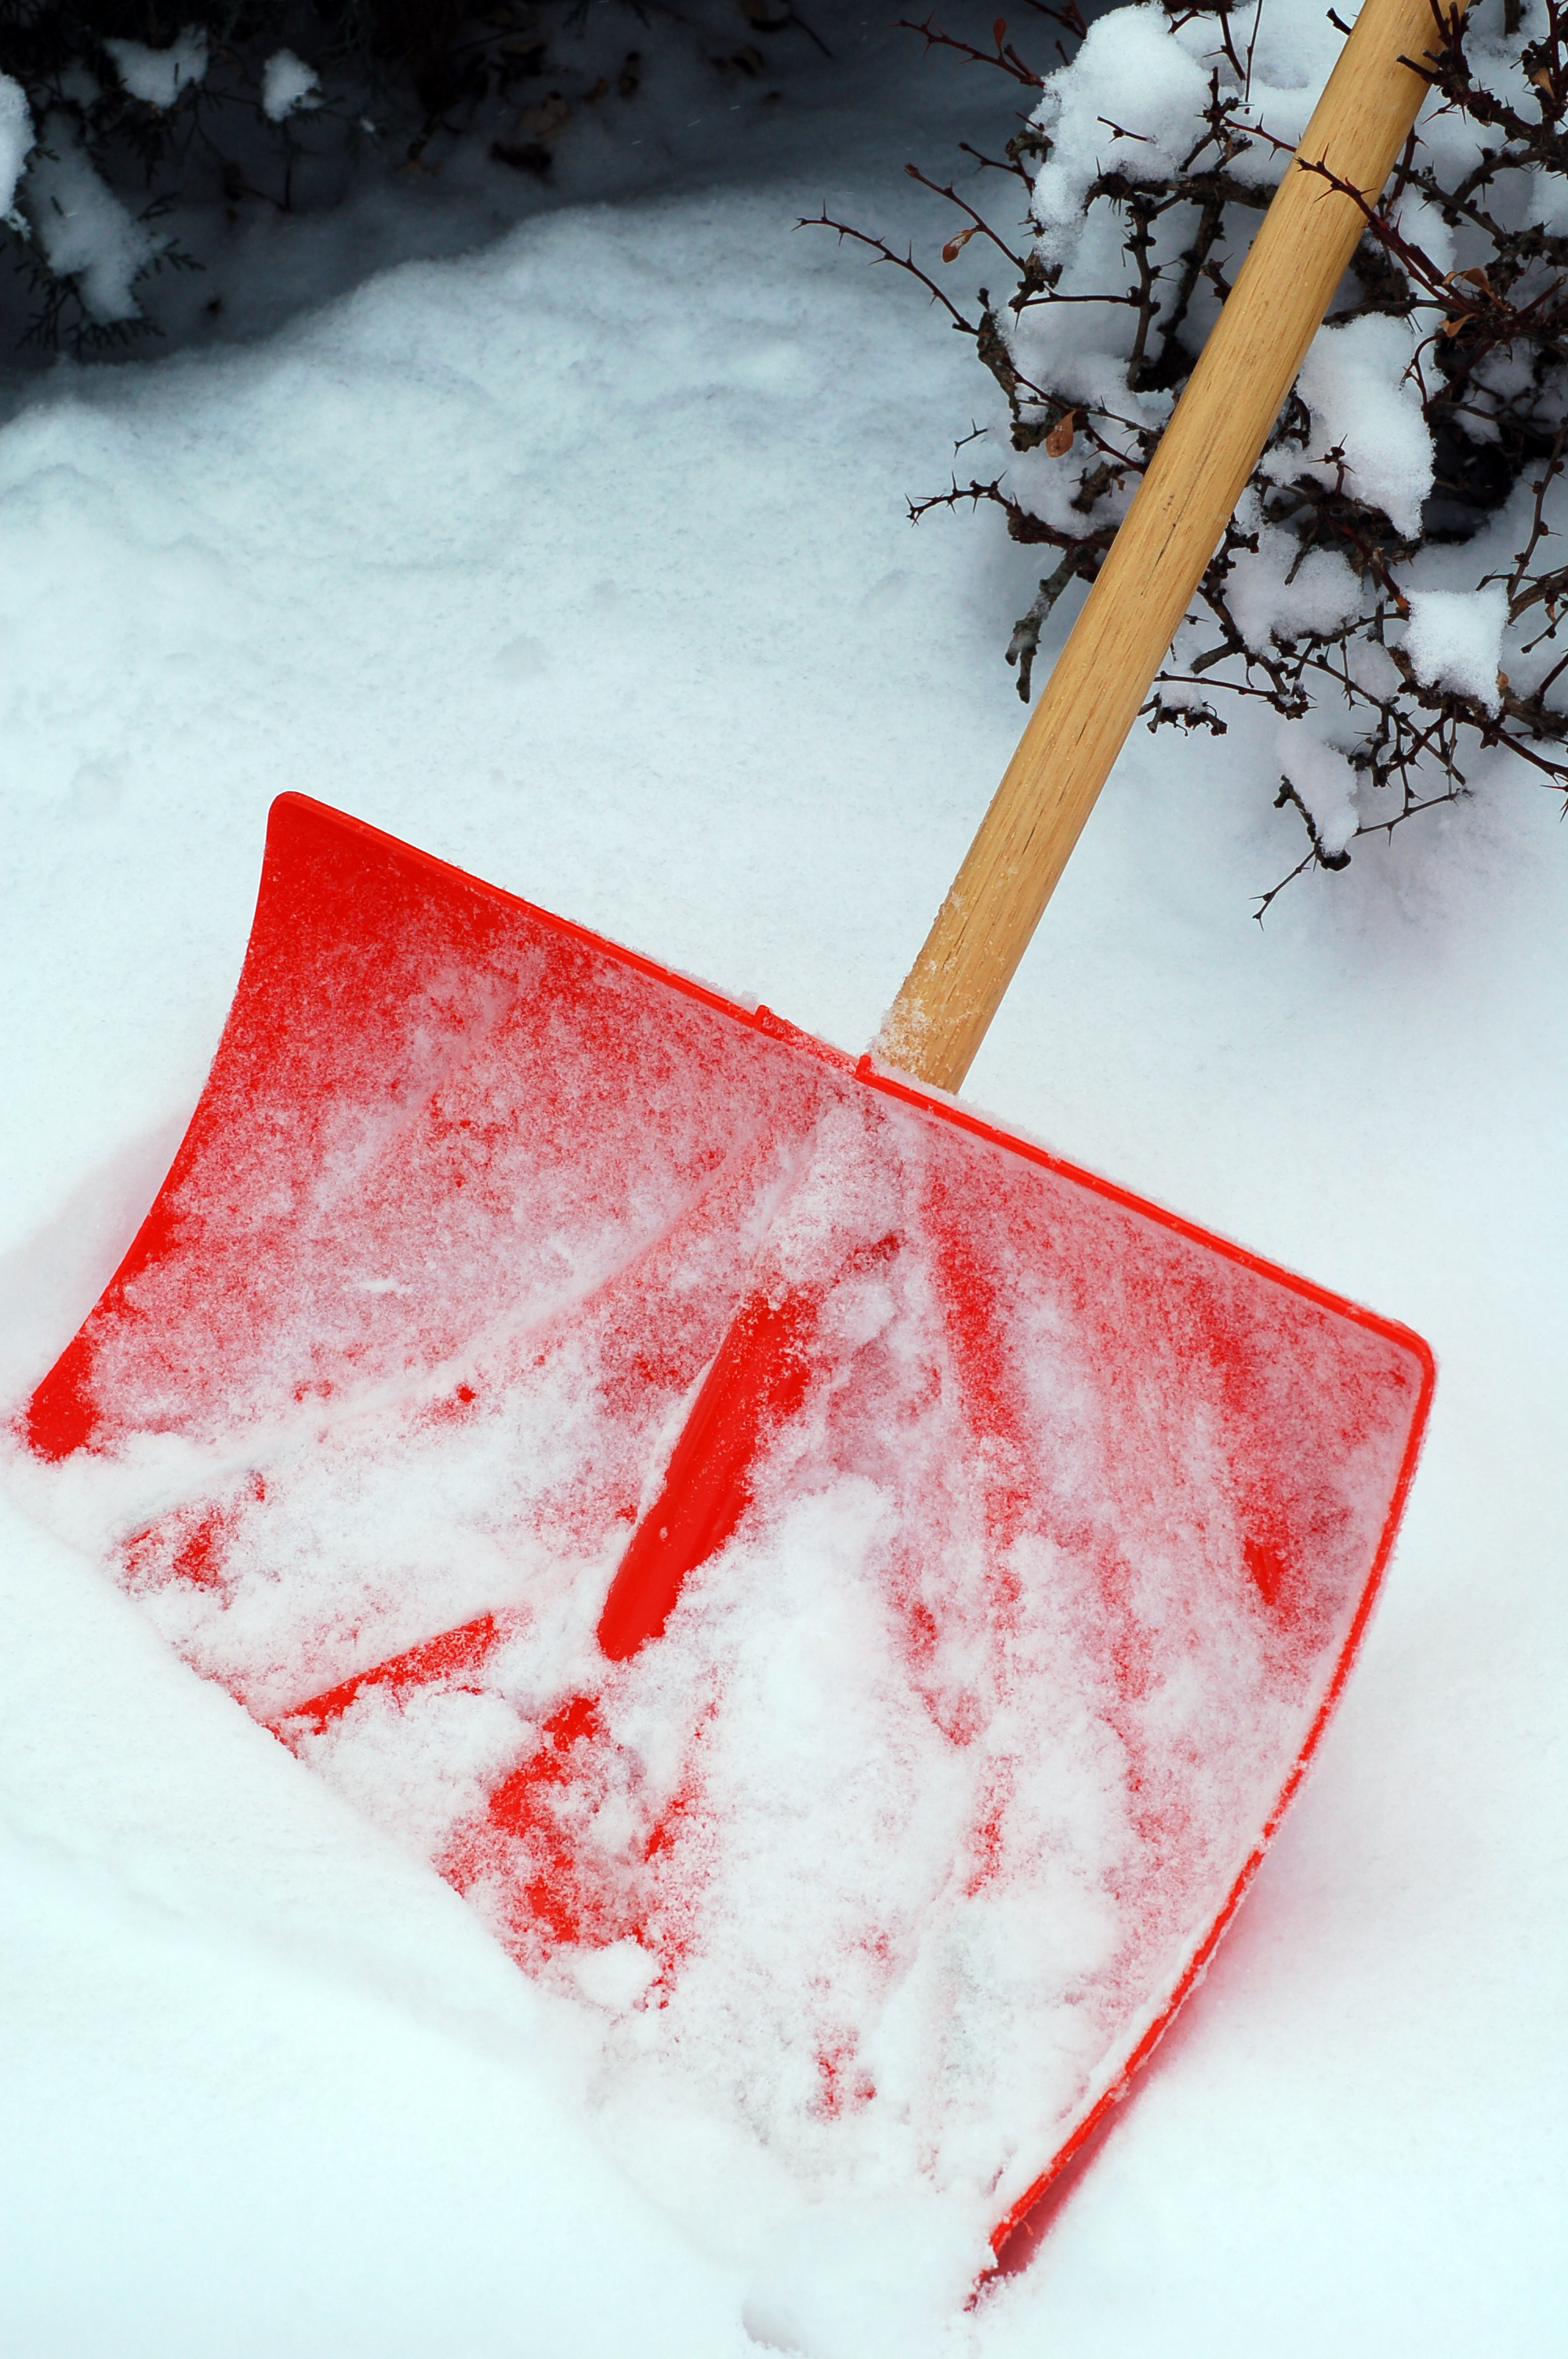 Read more about the article Shoveling Party – Saturday, January 31st at 9 AM